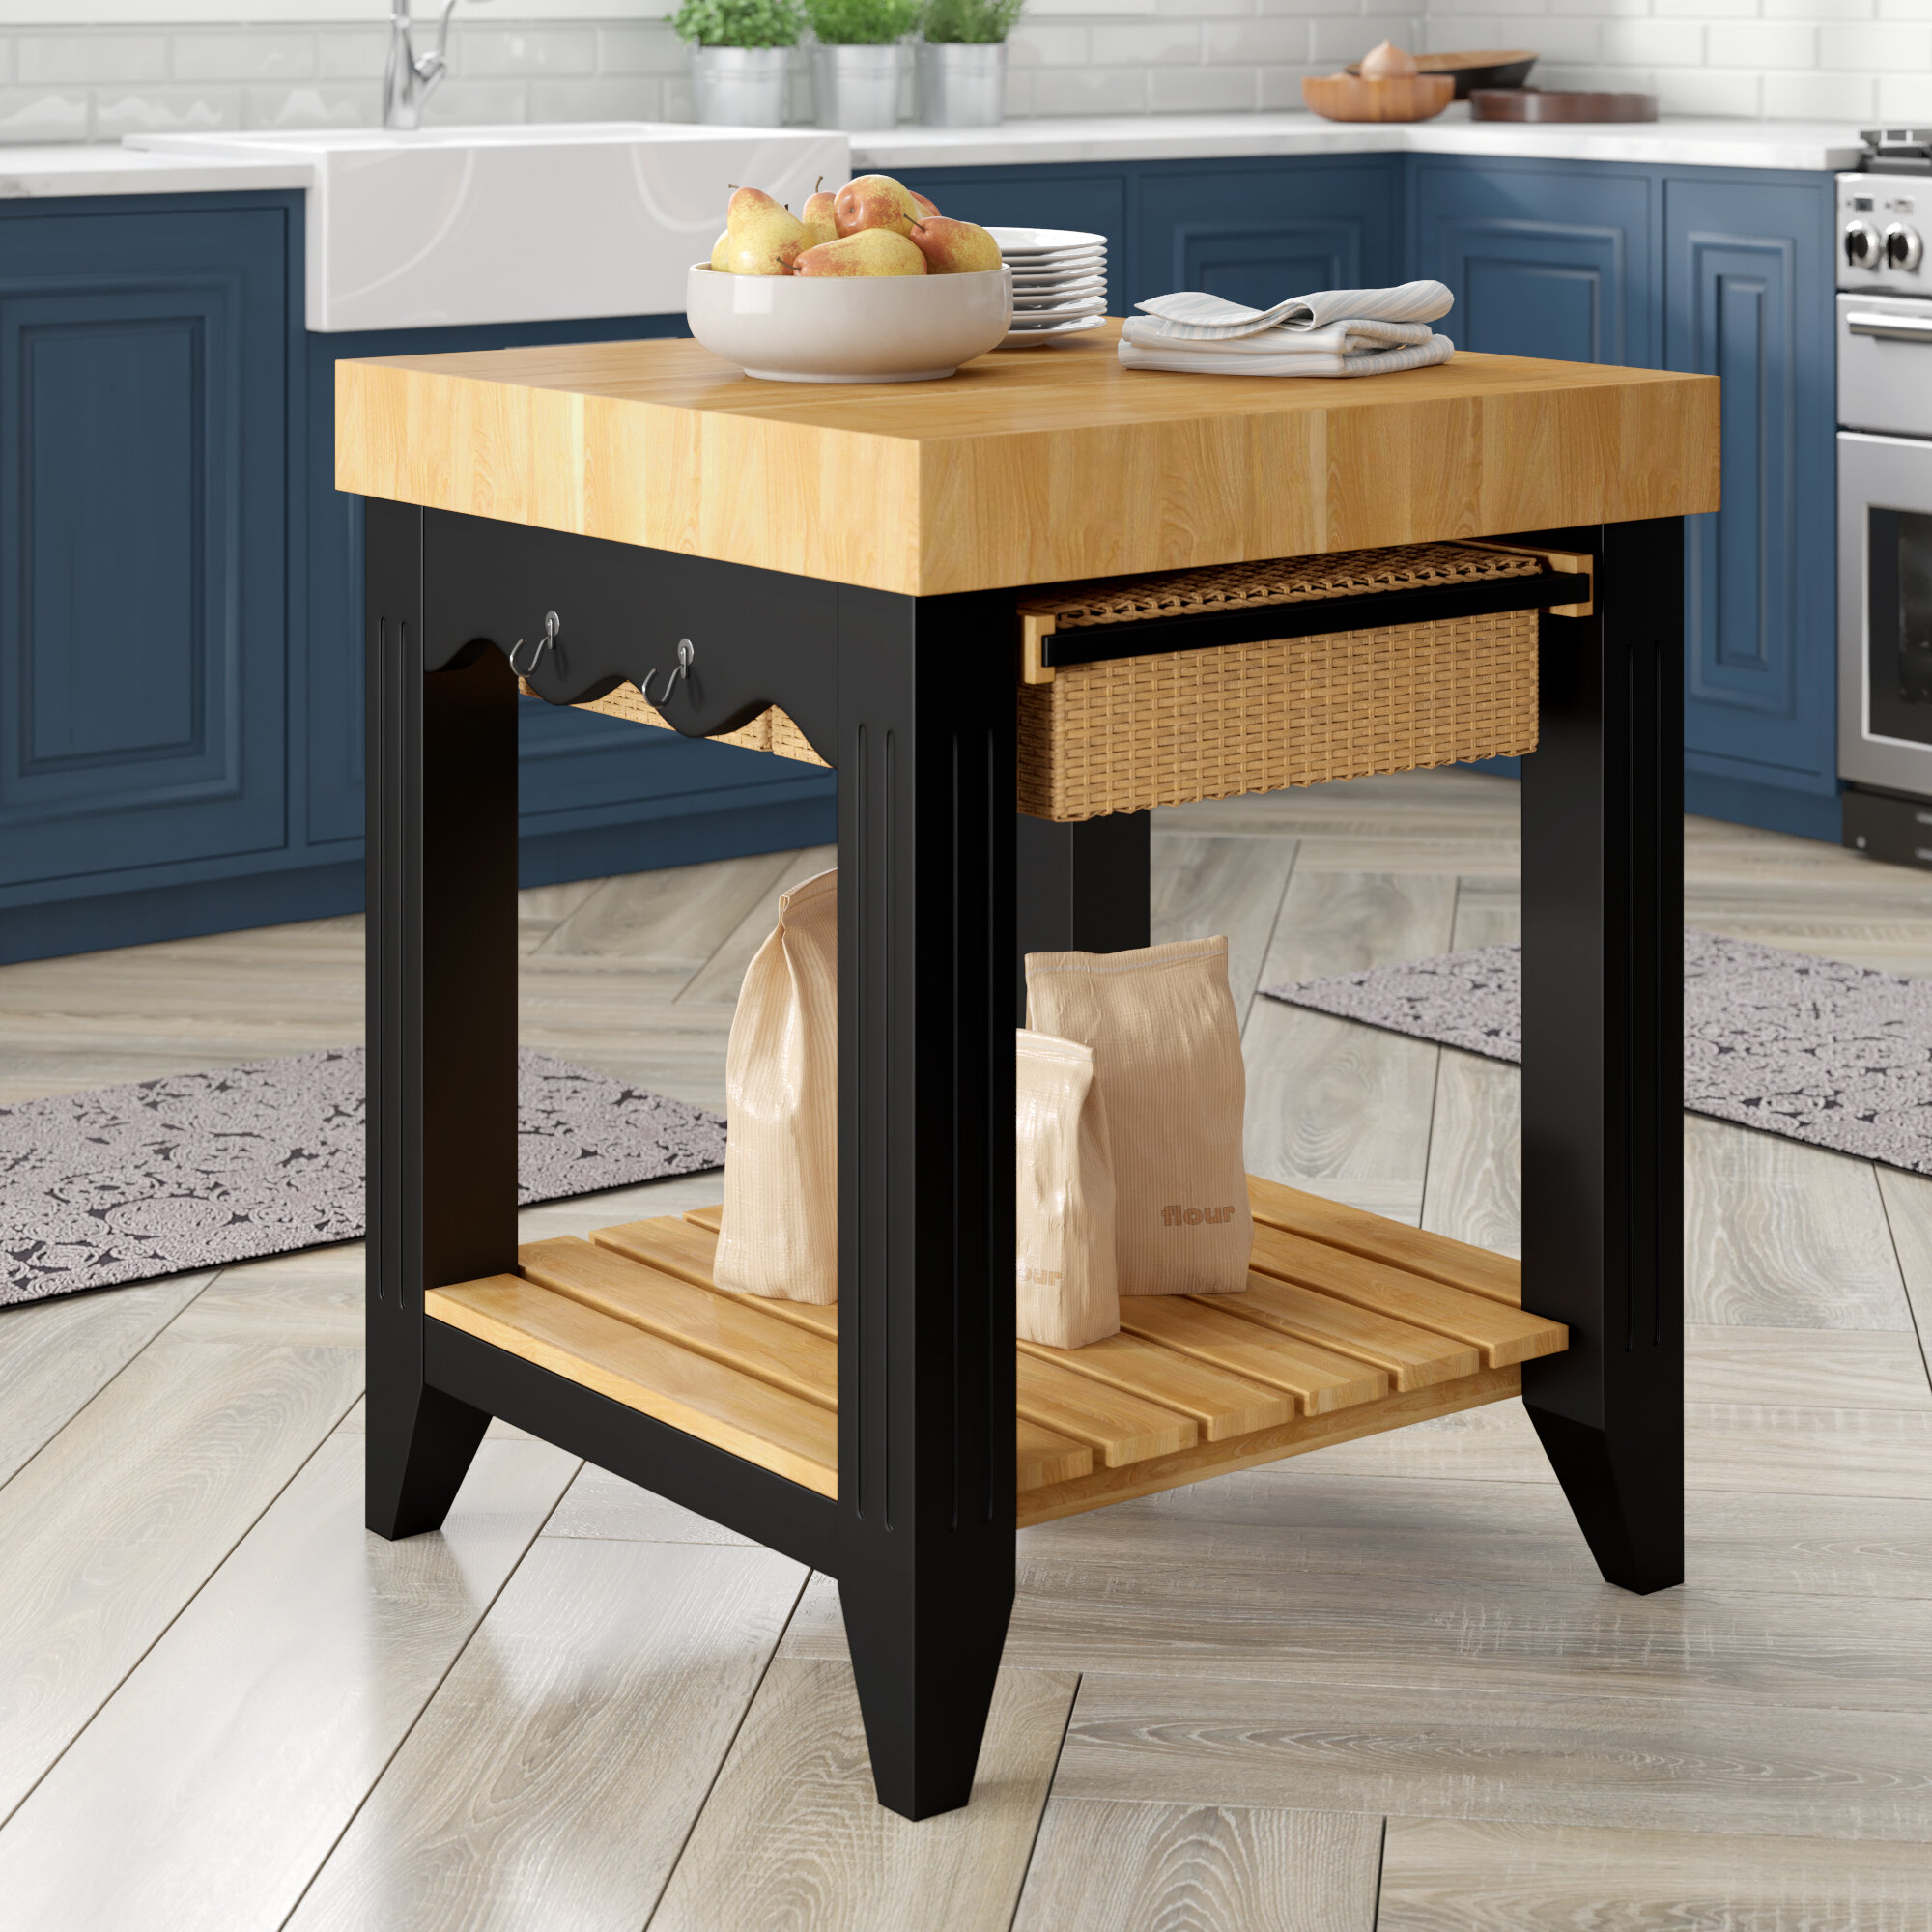 Red Barrel Studio Behling Prep Table With Butcher Block Top